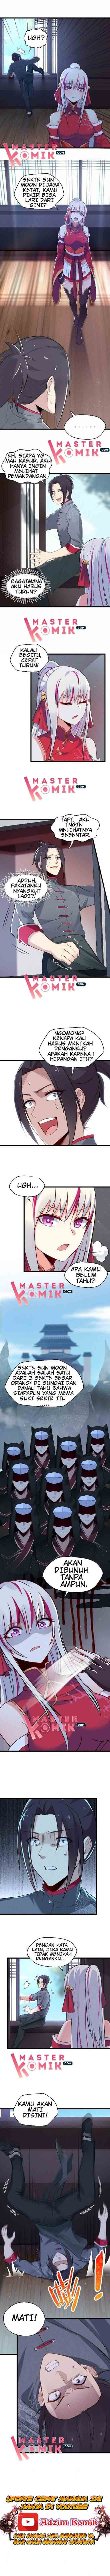 Supreme Martial Chef Chapter 04